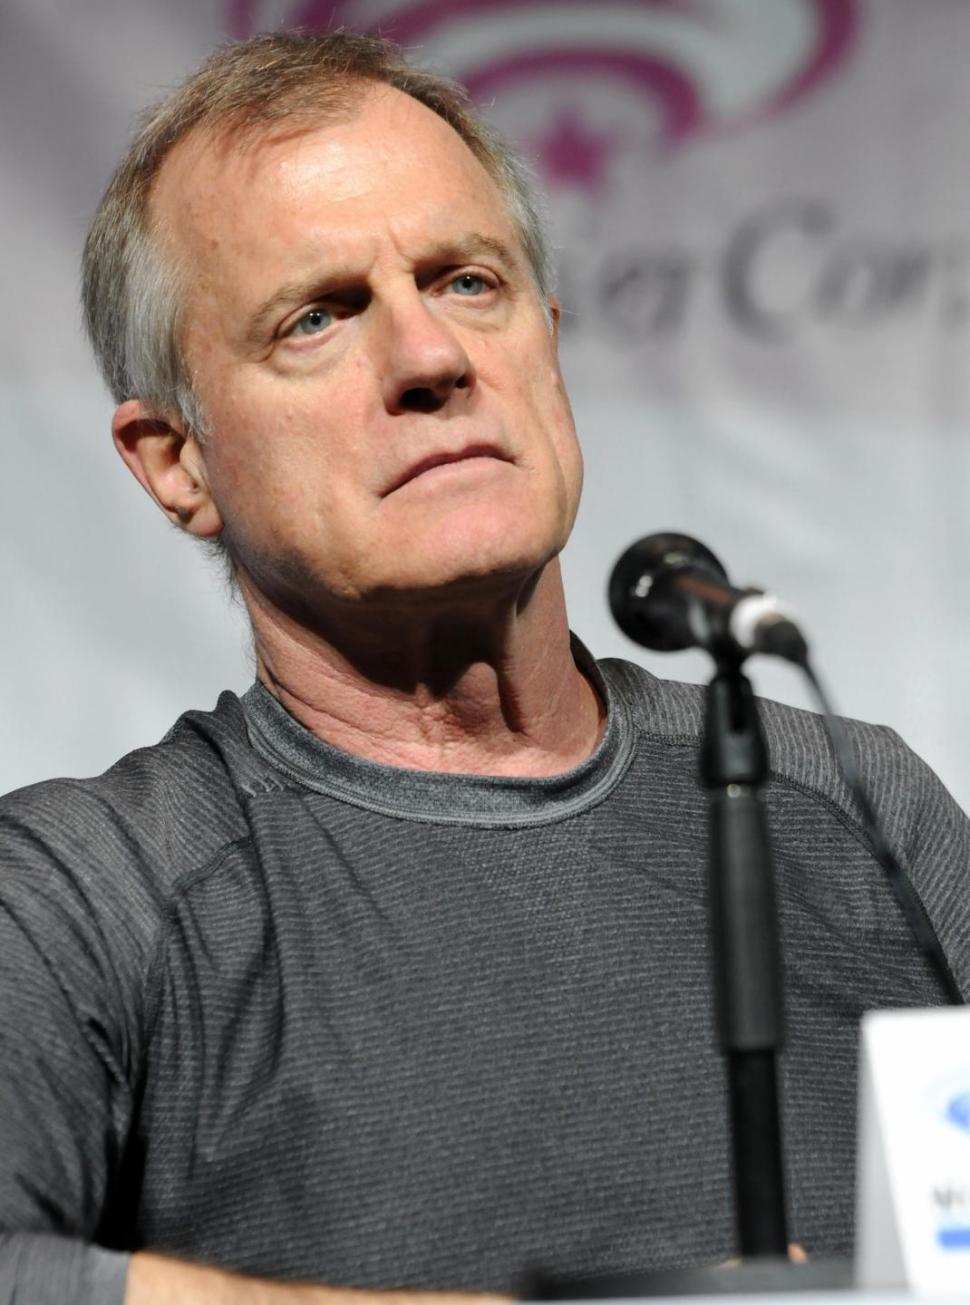 Stephen Collins played Eric Camden, a Protestant pastor and father.